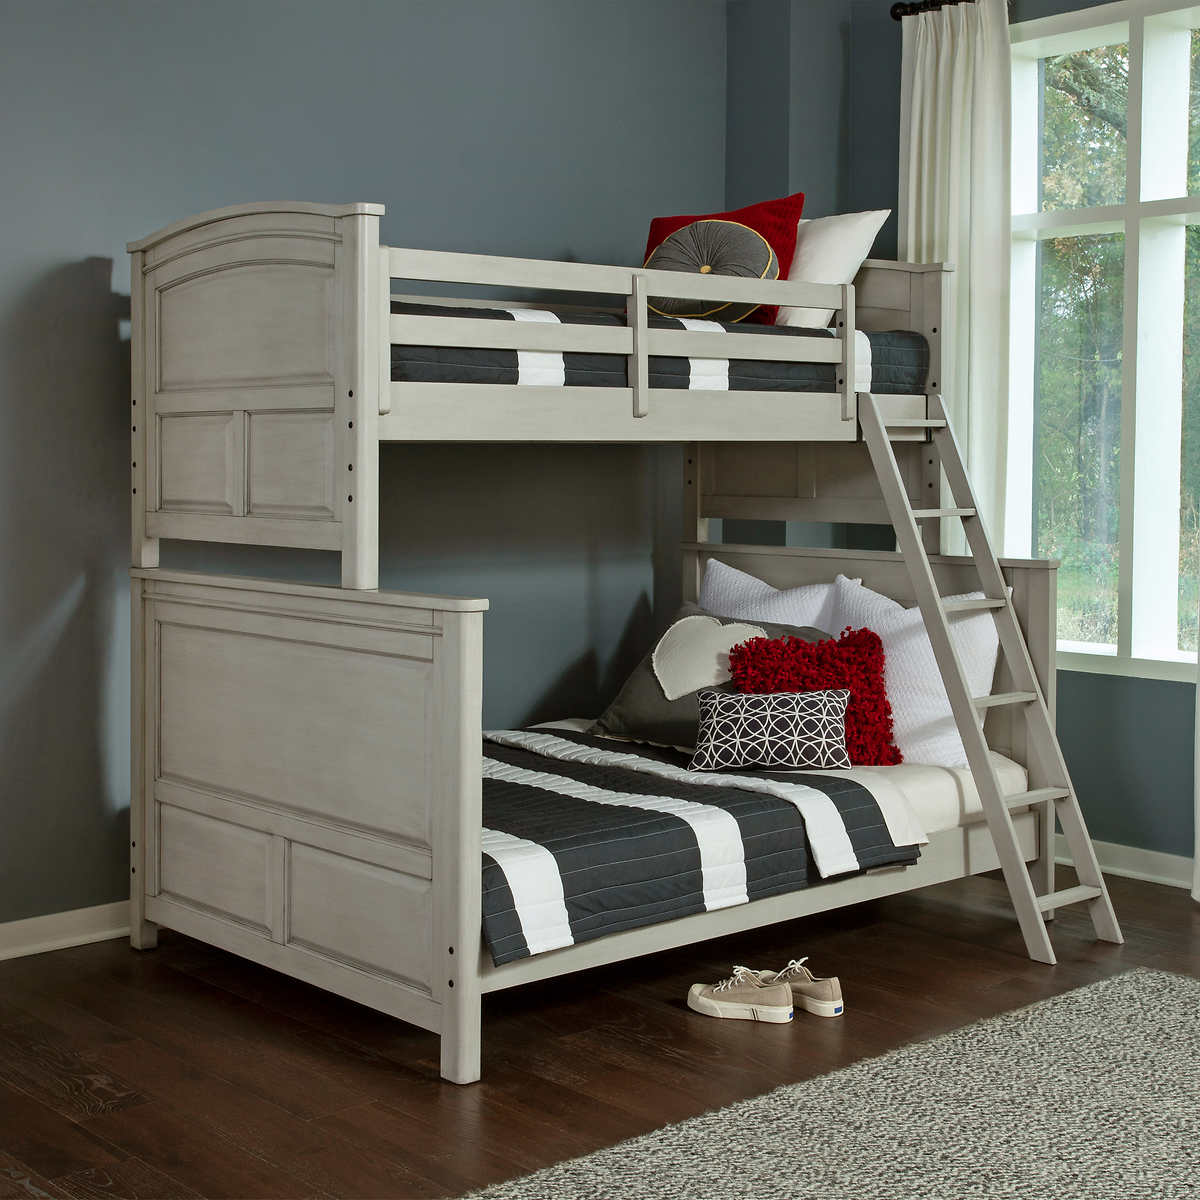 Wingate Twin Over Full Bunk Bed Costco, Fire Station Bunk Bed Furniture Row